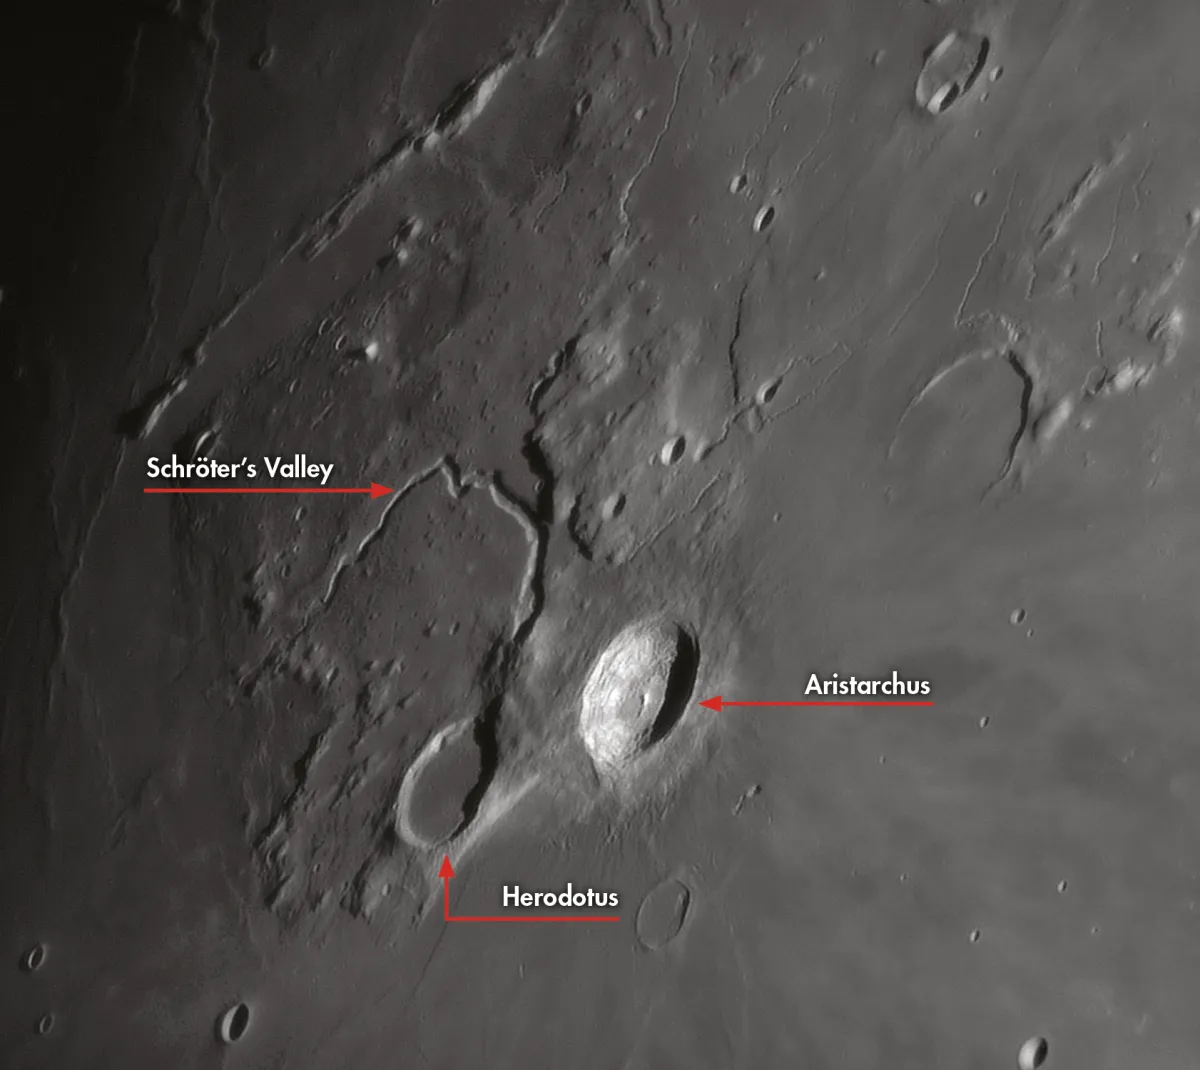 Extending away from the crater to the northwest is a wiggling line, known as the Vallis Schröteri or Schröter’s Valley.